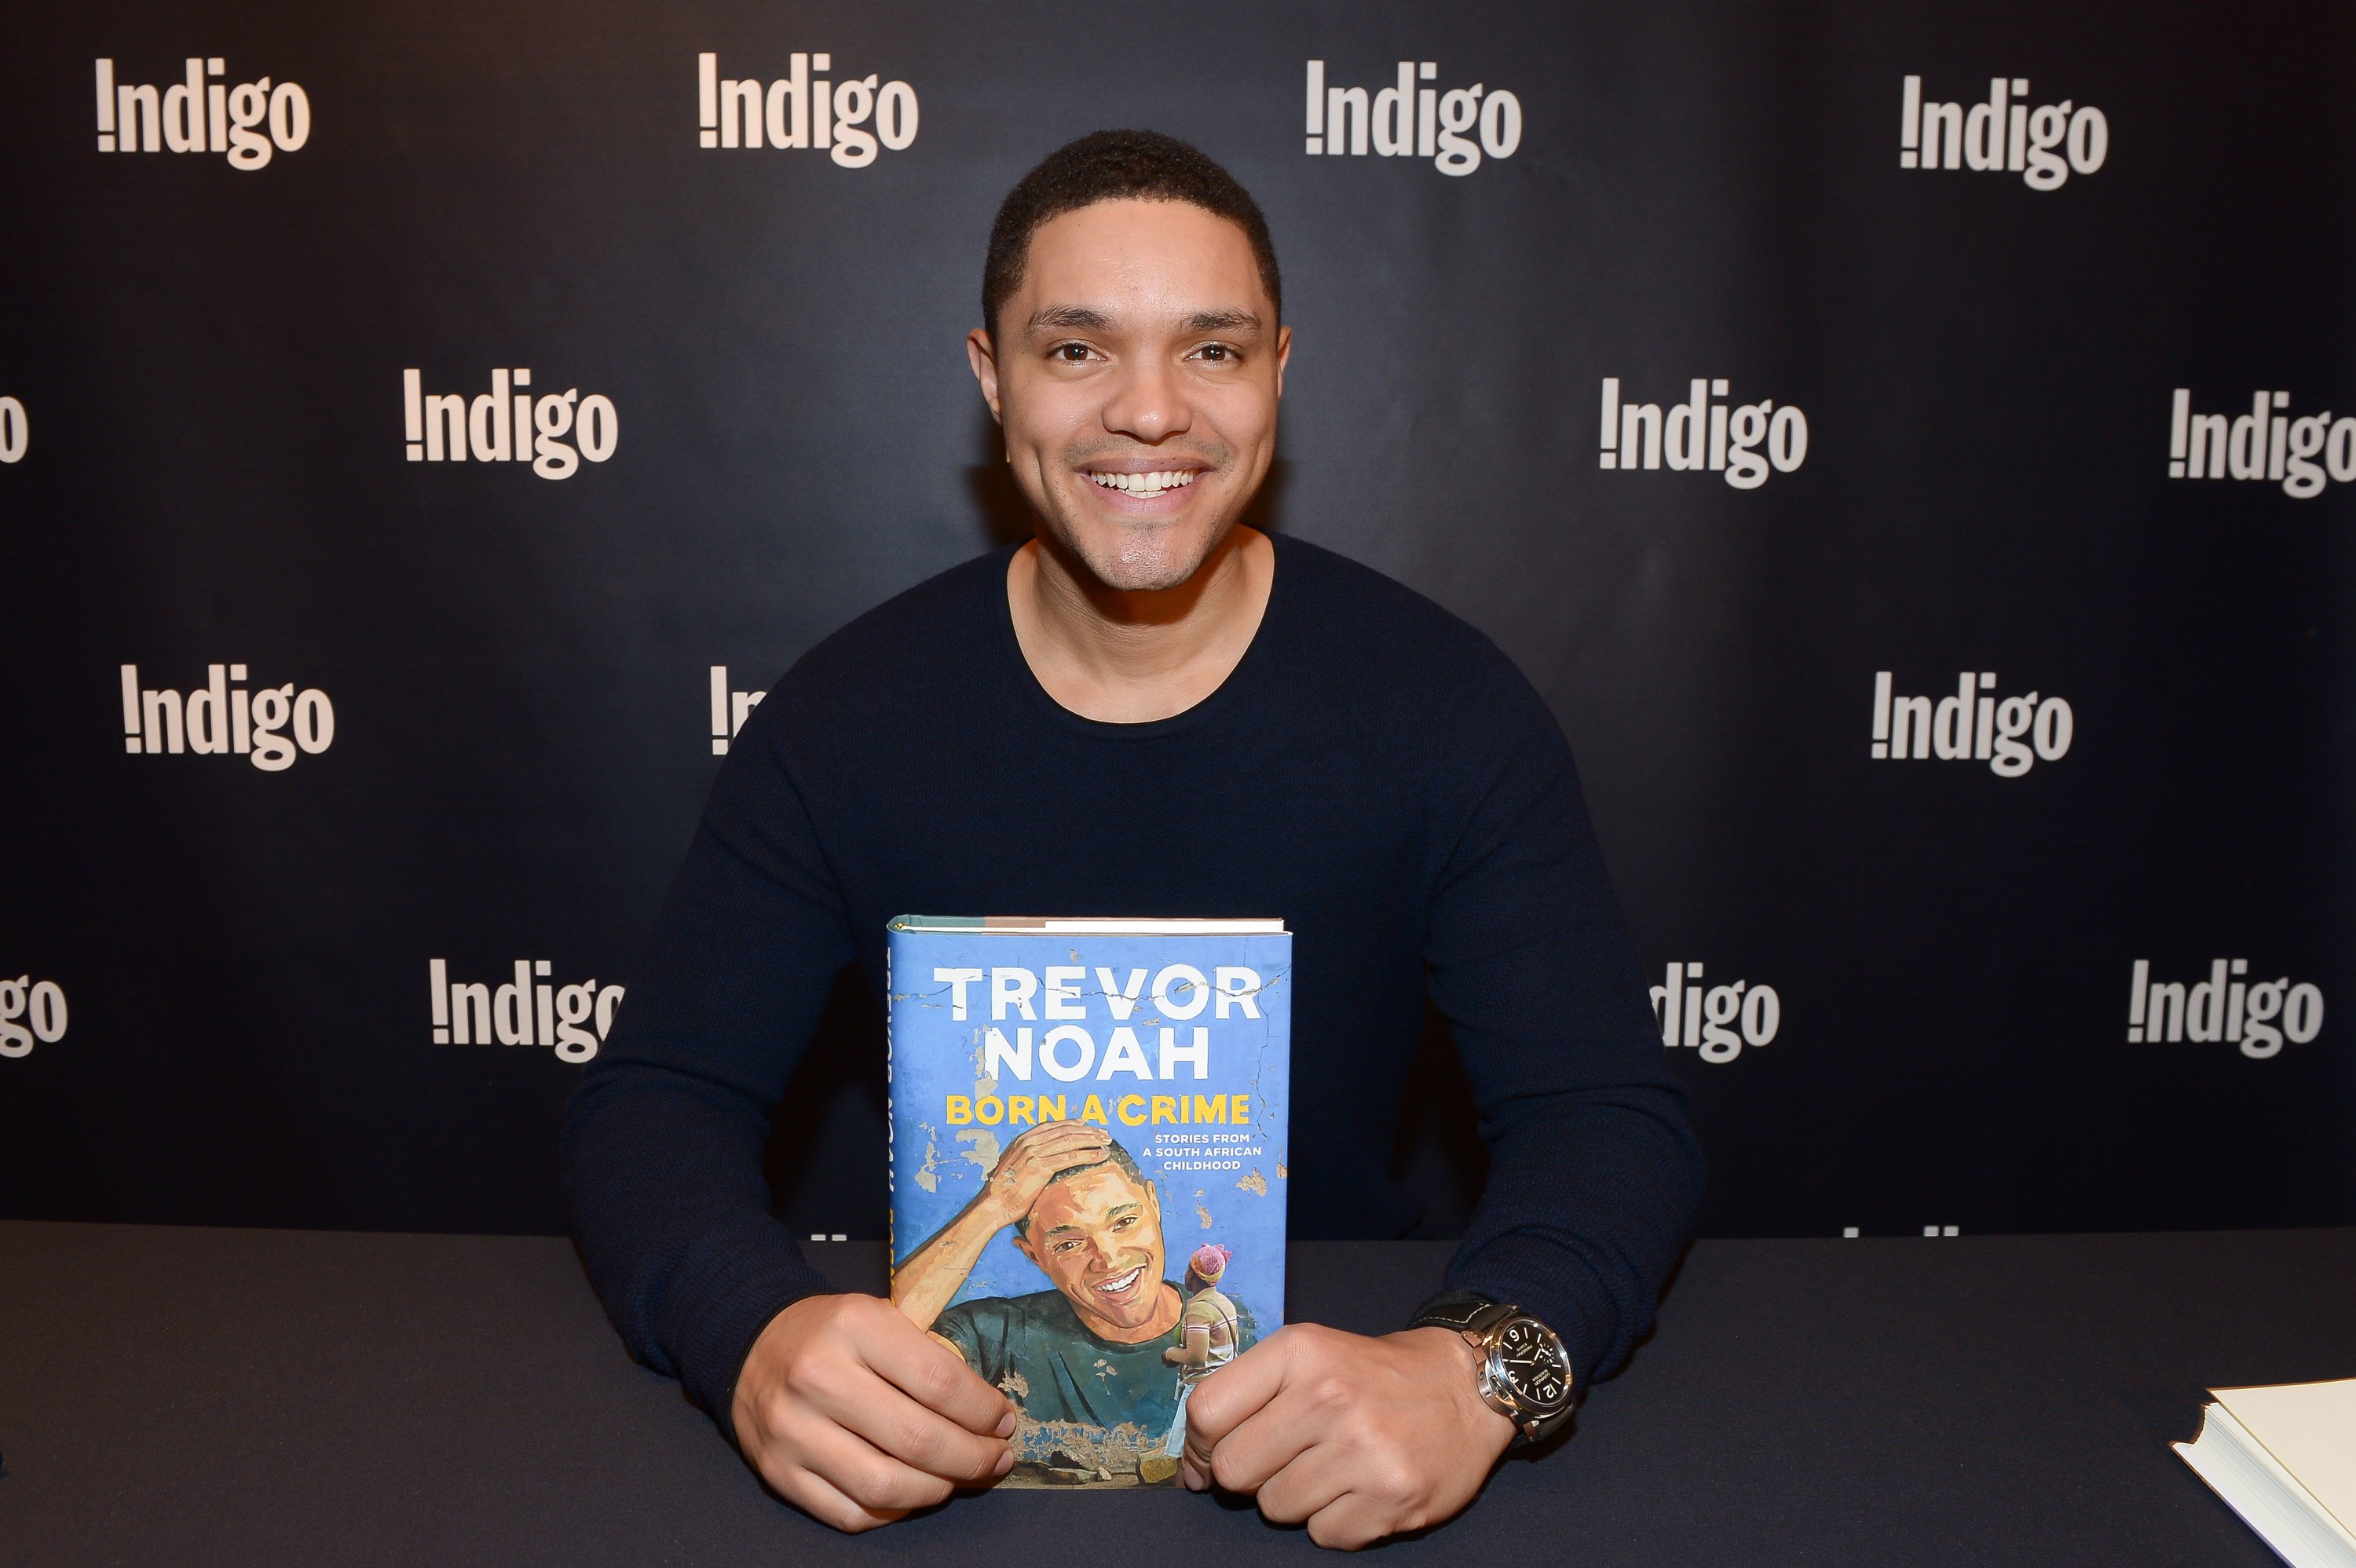 Trevor Noah signs copies of his new book "Born A Crime" at Indigo Eaton Centre on December 2, 2016 in Toronto, Canada. | Source: Getty Images